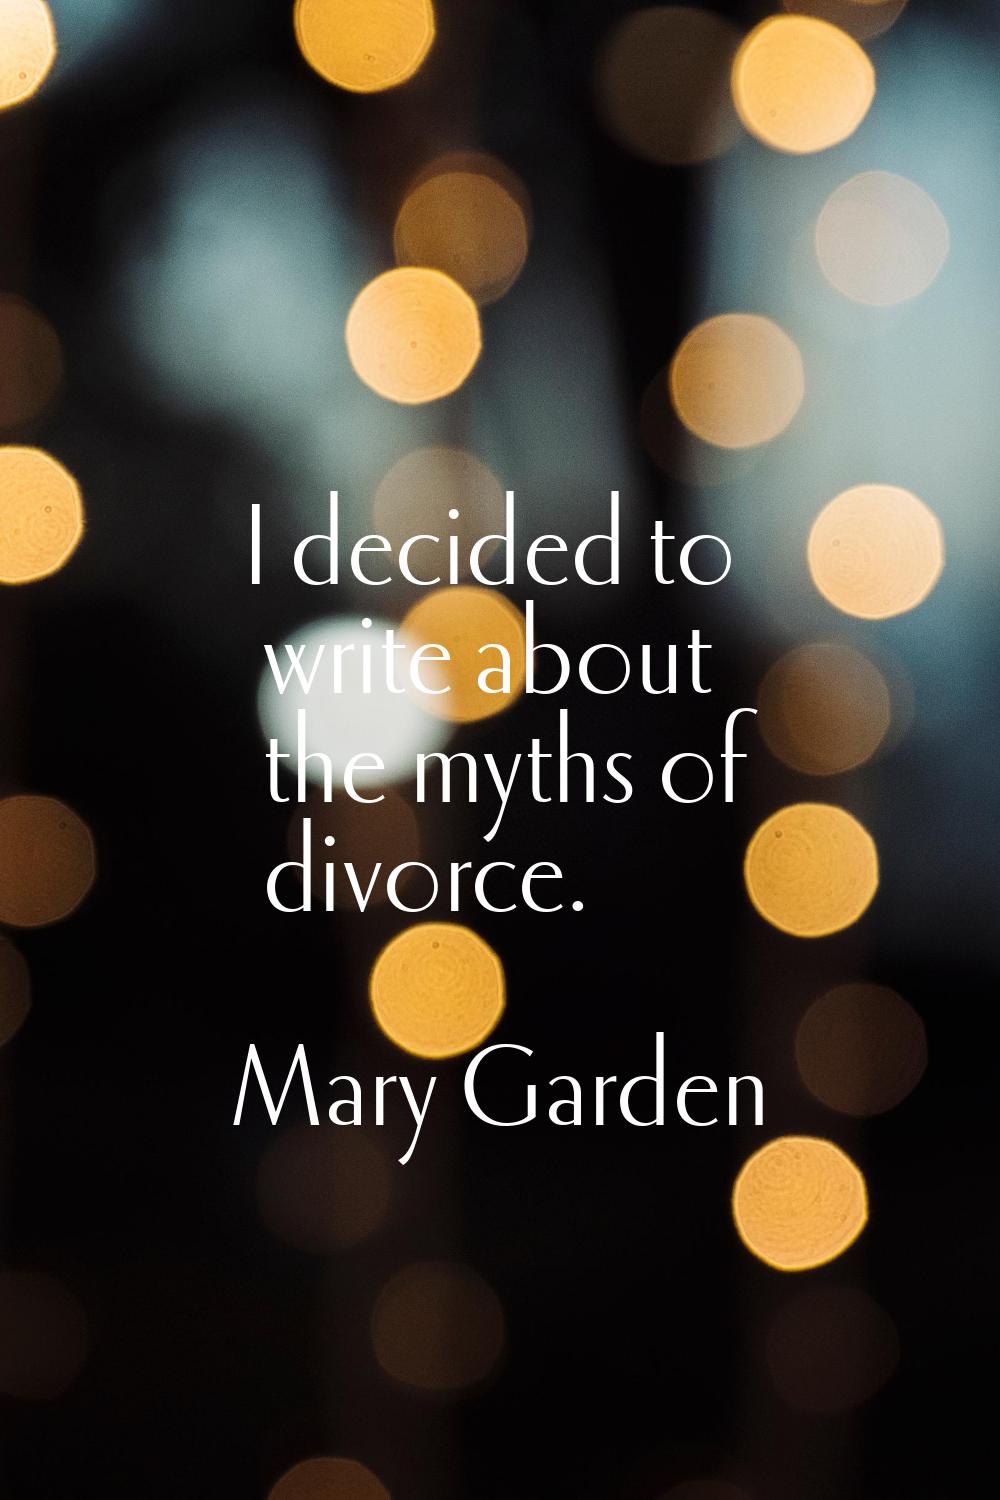 I decided to write about the myths of divorce.